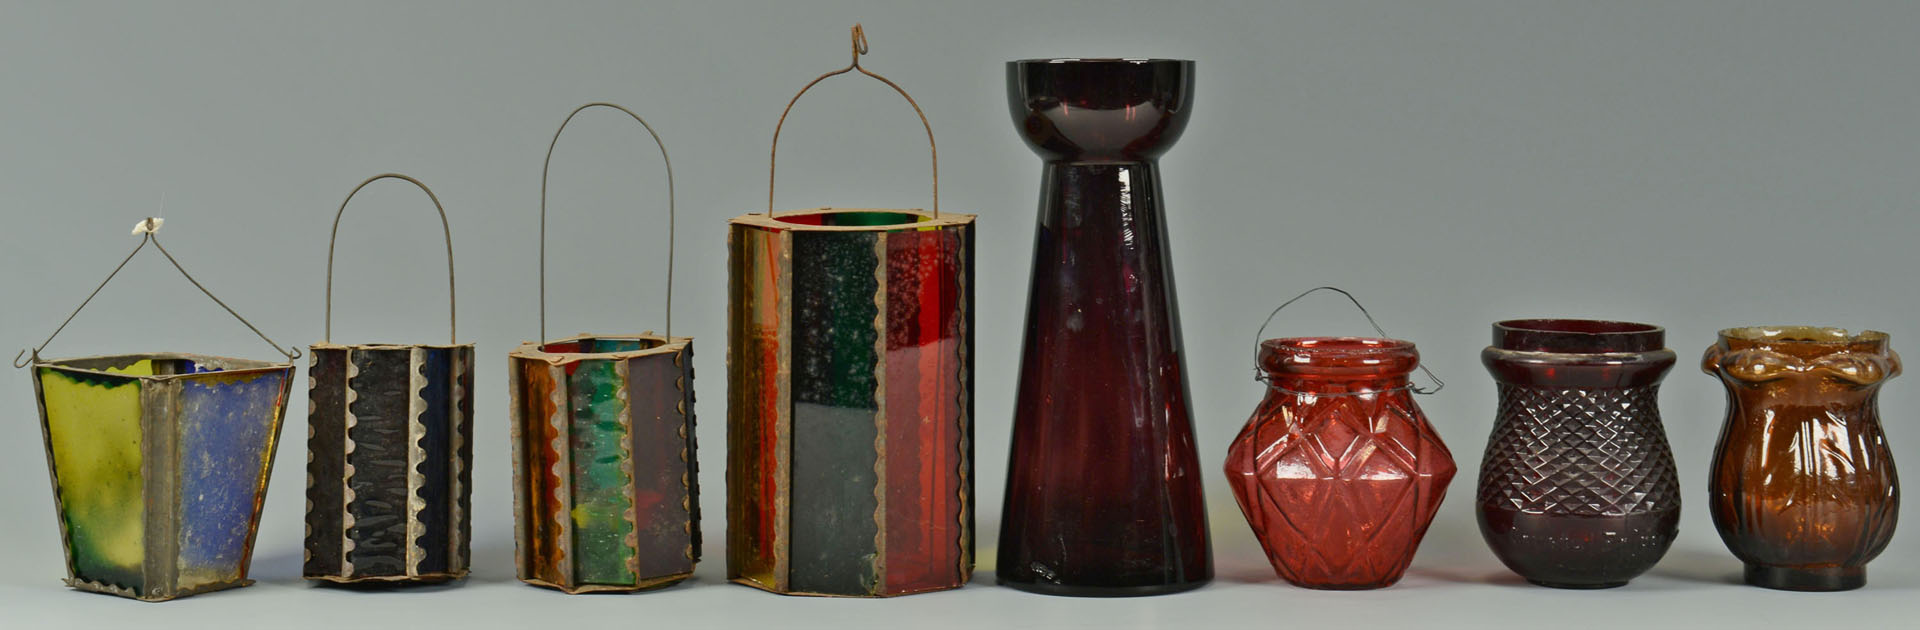 Lot 520: 12 Colored Christmas lights, lanterns, and vase